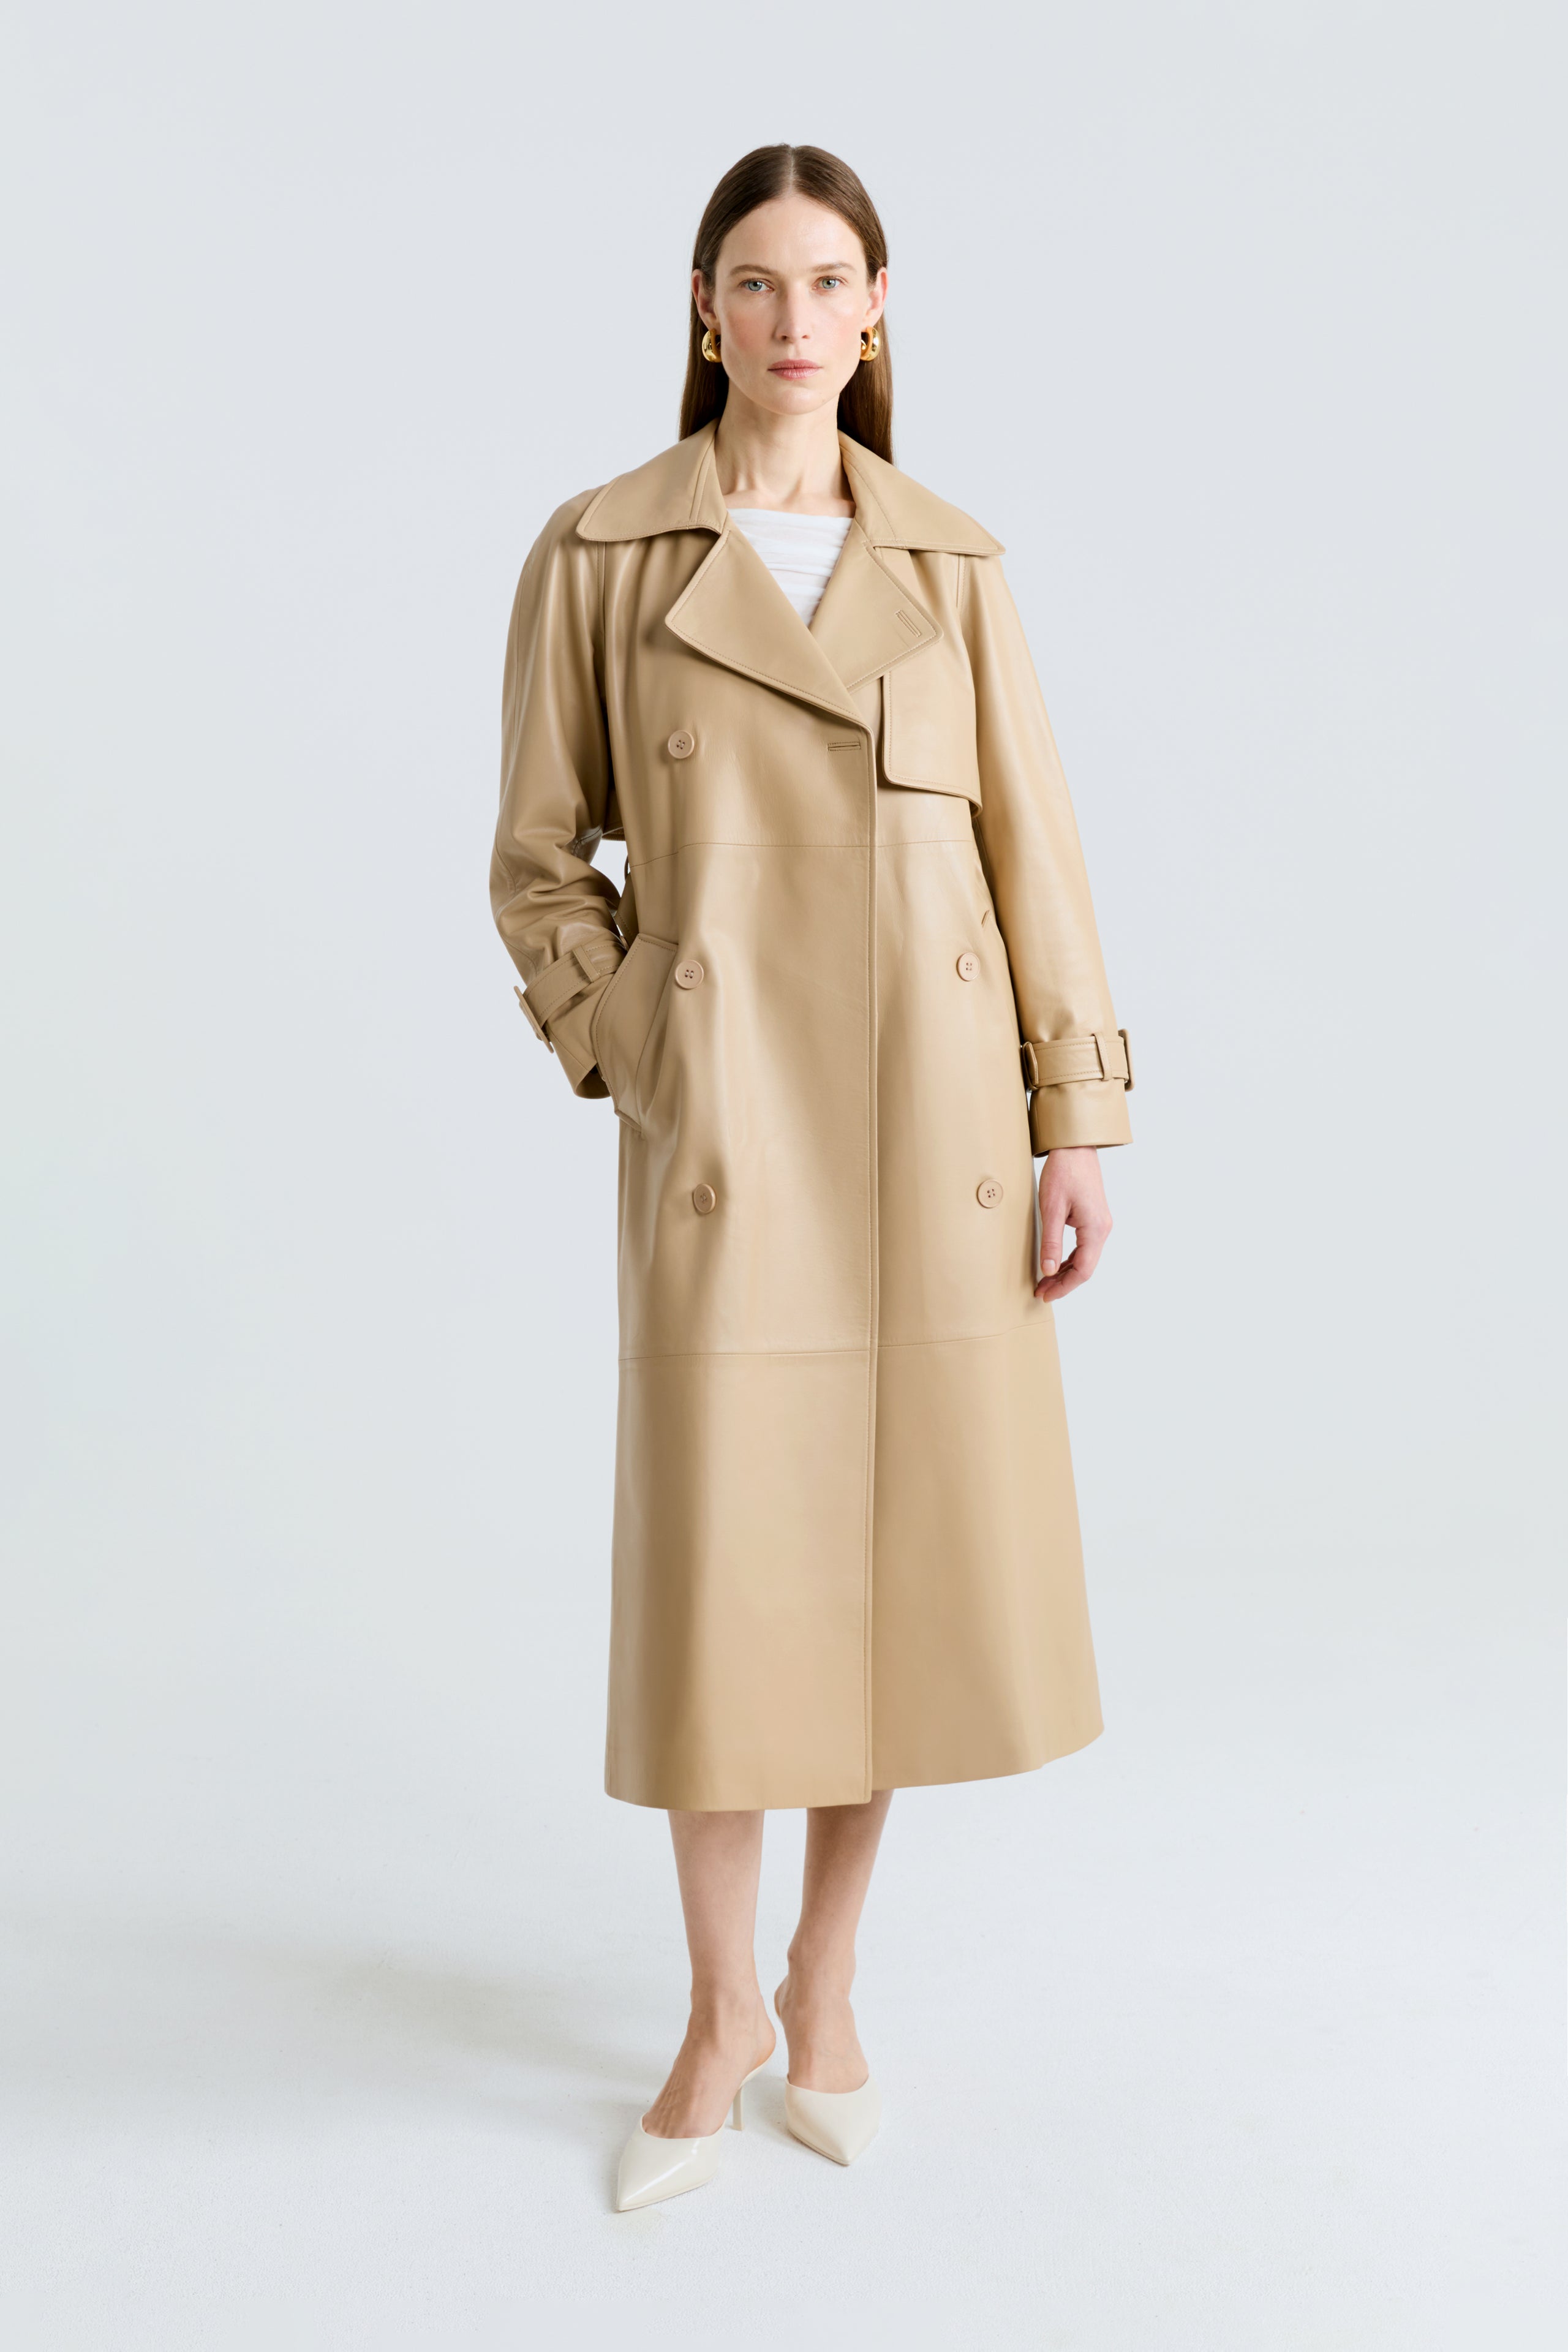 Model is wearing the Henri Beige Oversized Leather Trench Front